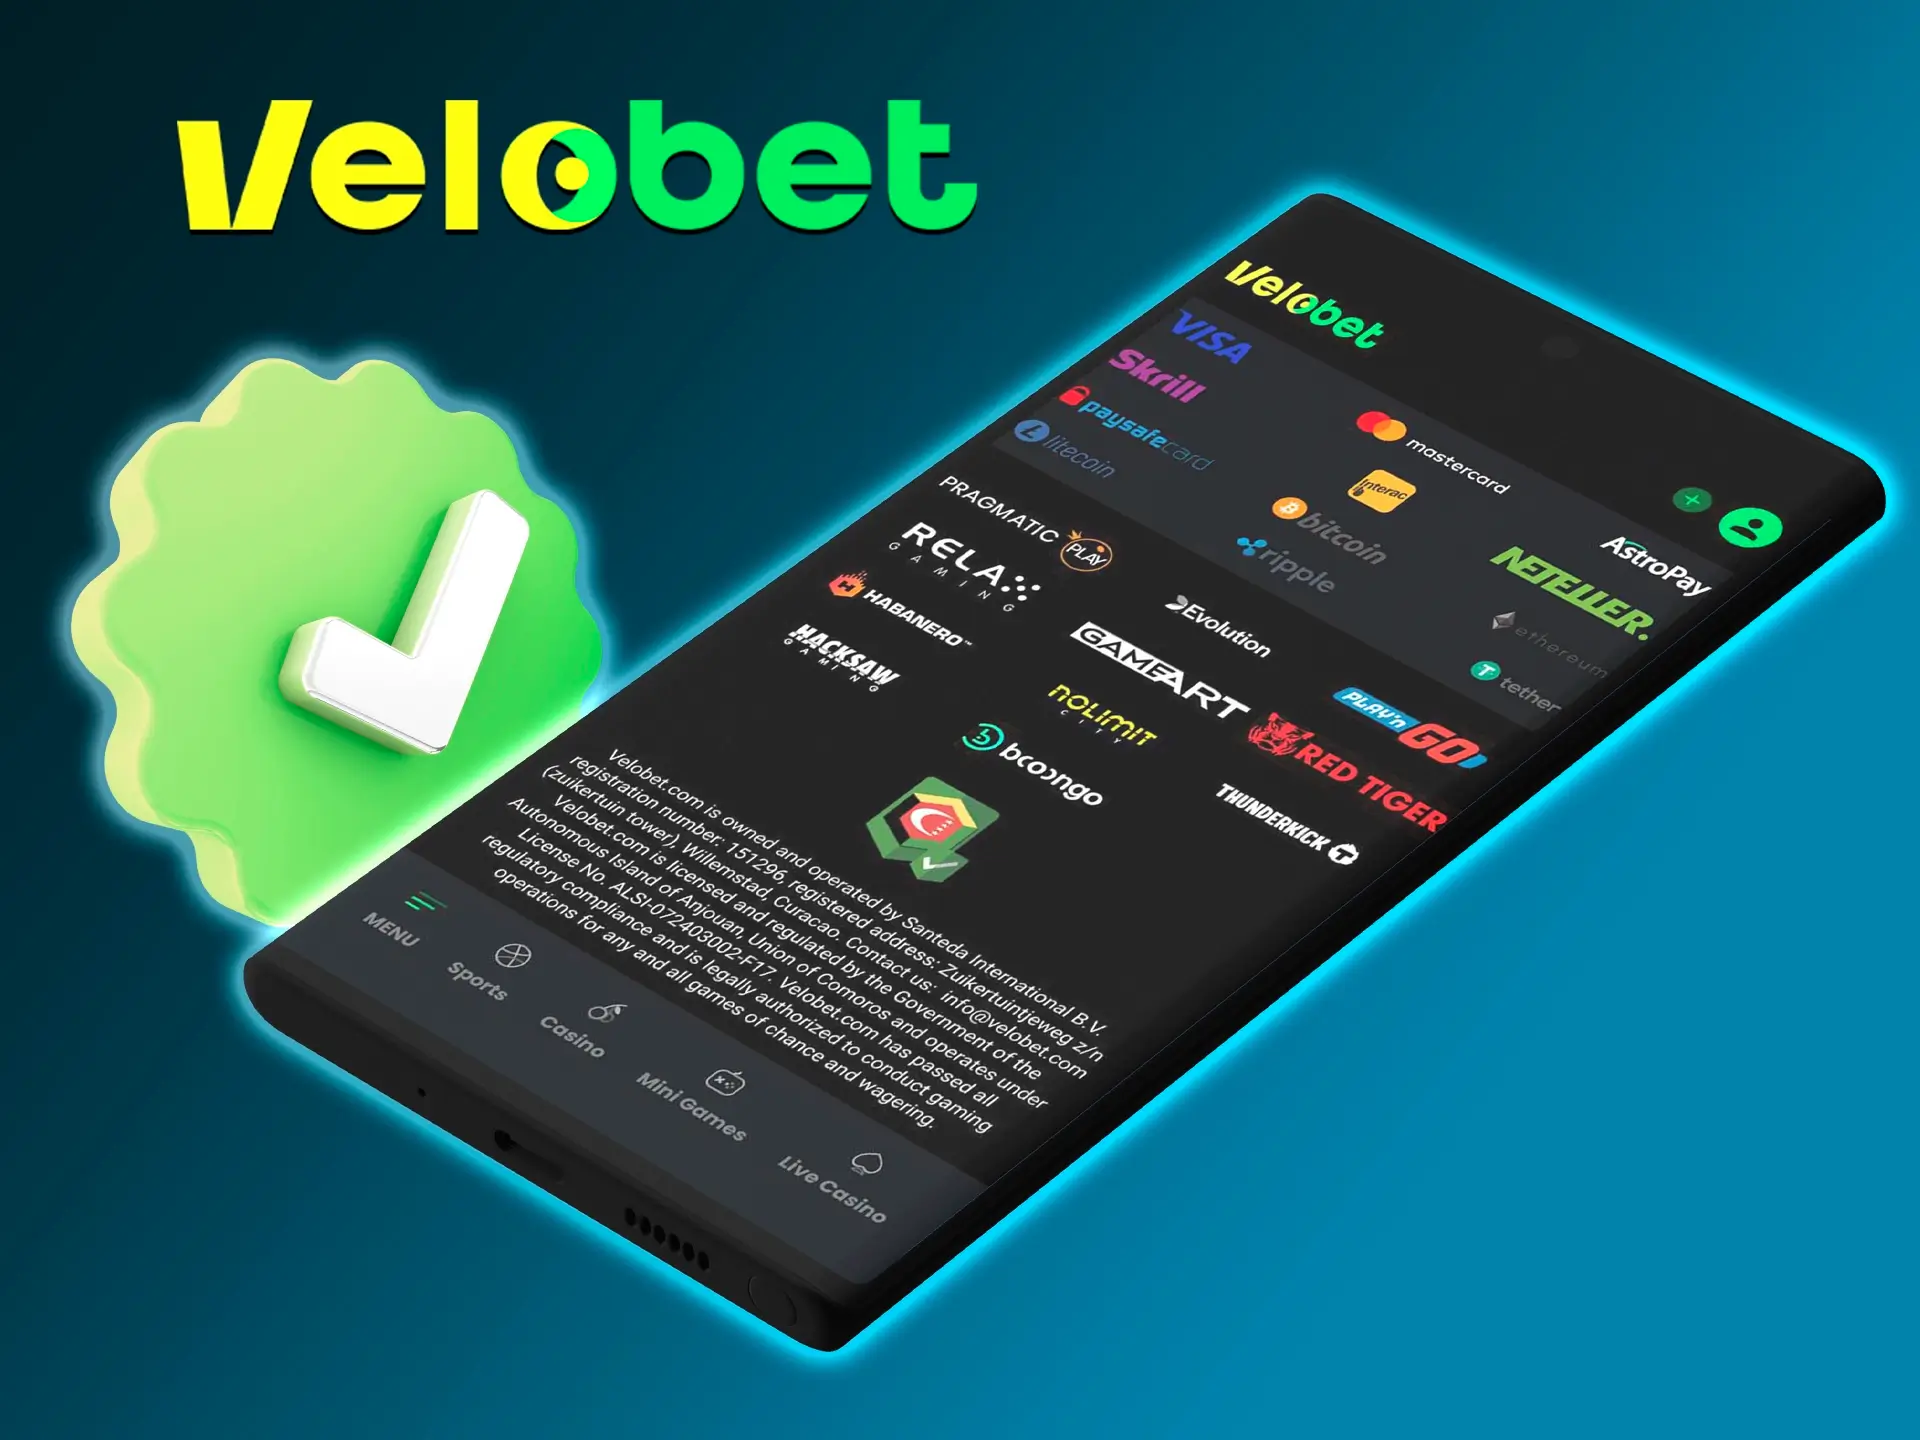 Use the Velobet app, which is regularly updated and provides its customers with a high level of protection.